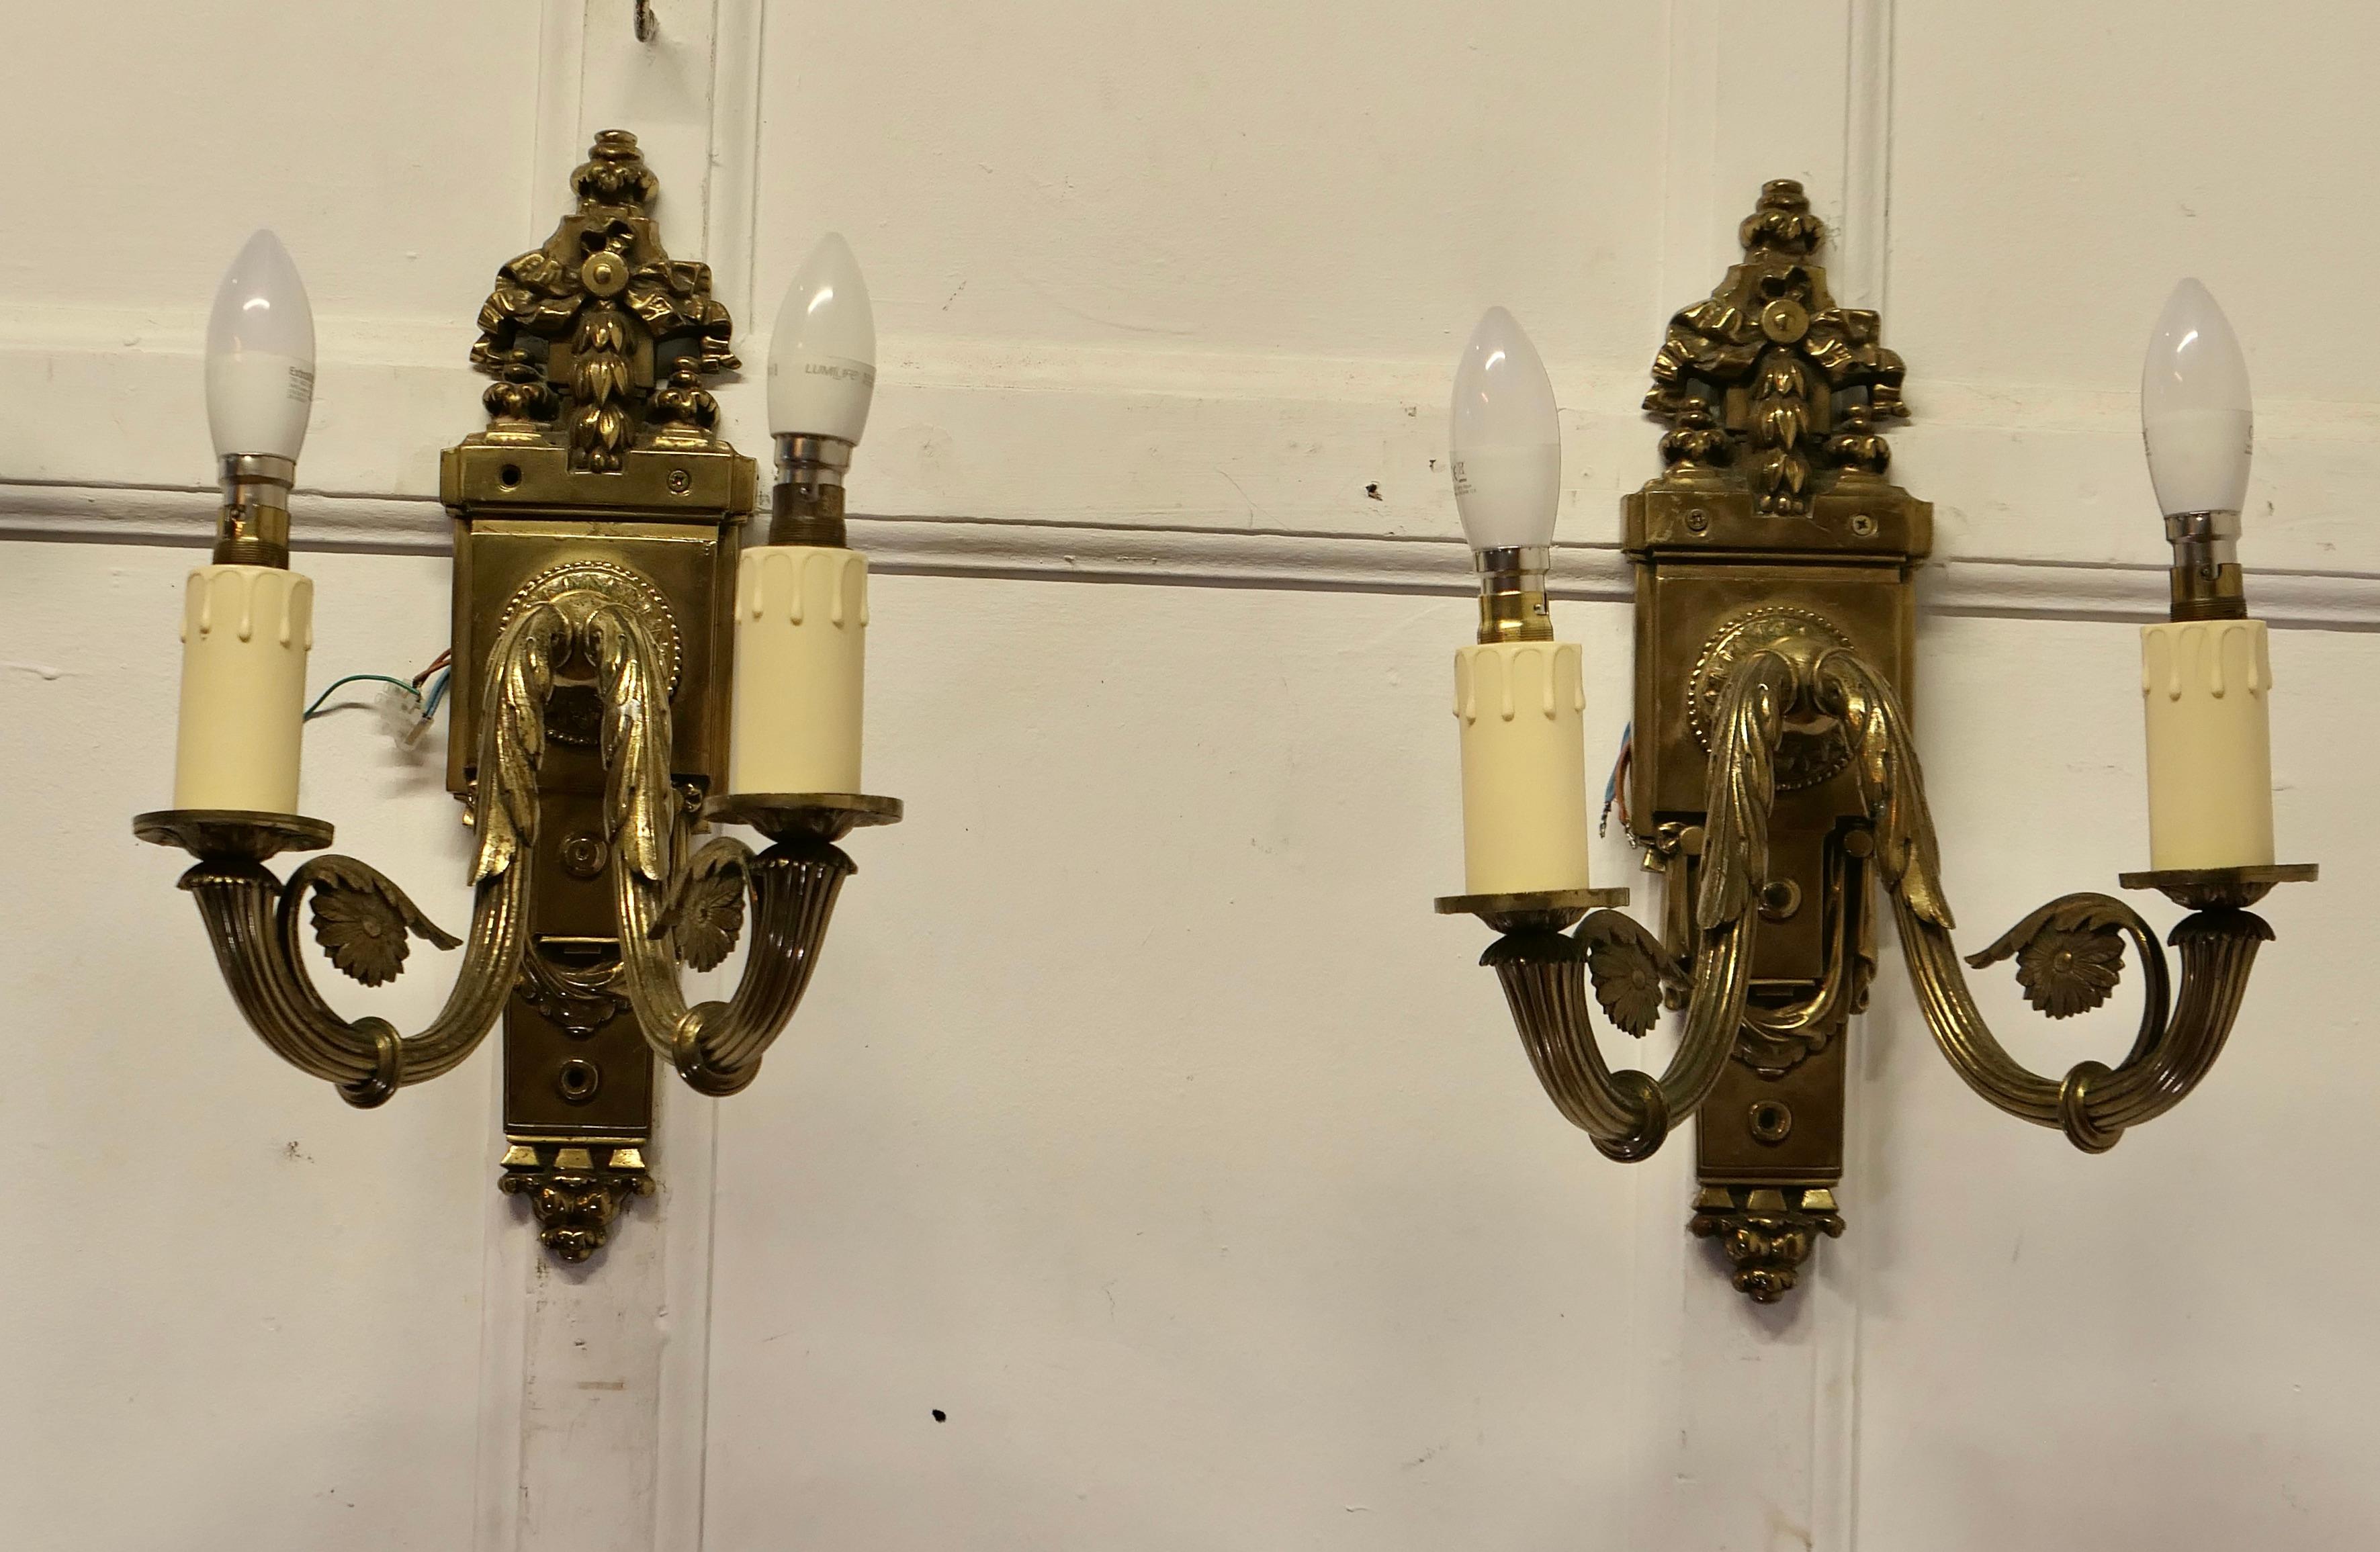 A Pair of Neo Classical Large Brass Twin Wall Lights

This is a very attractive pair of lights they are very heavy and decorative each of the light fittings have 2 sconces 

The lights are in good vintage condition and working, they will have to be